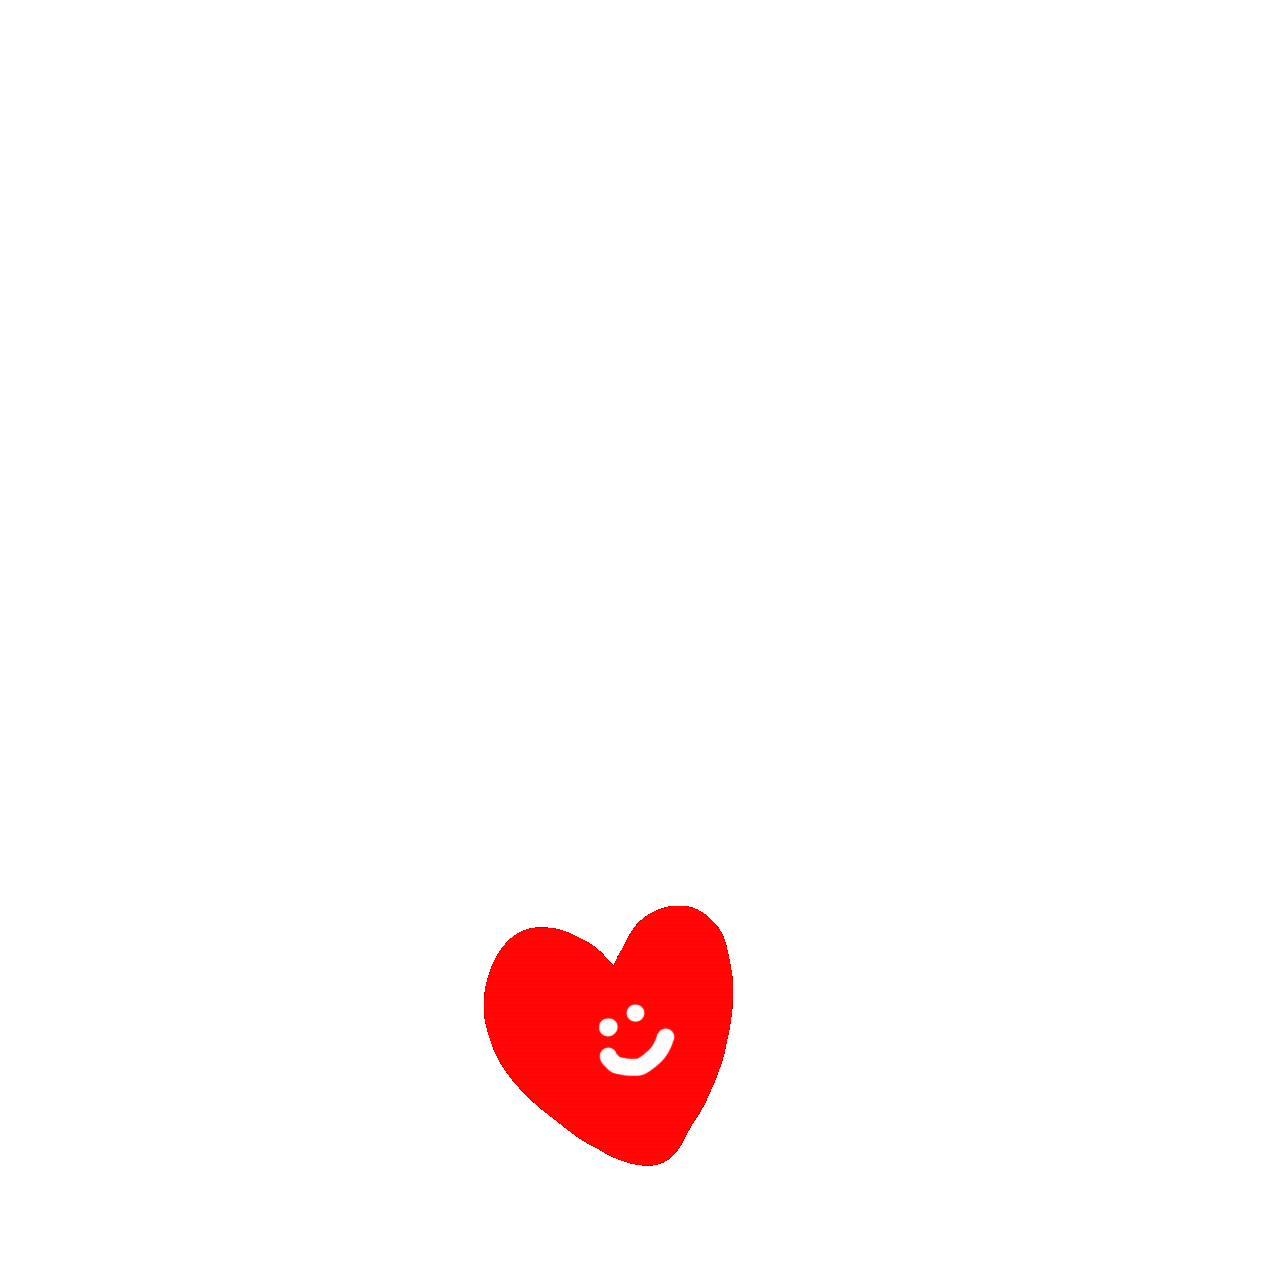 Heart Love Sticker by haenaillust for iOS & Android | GIPHY